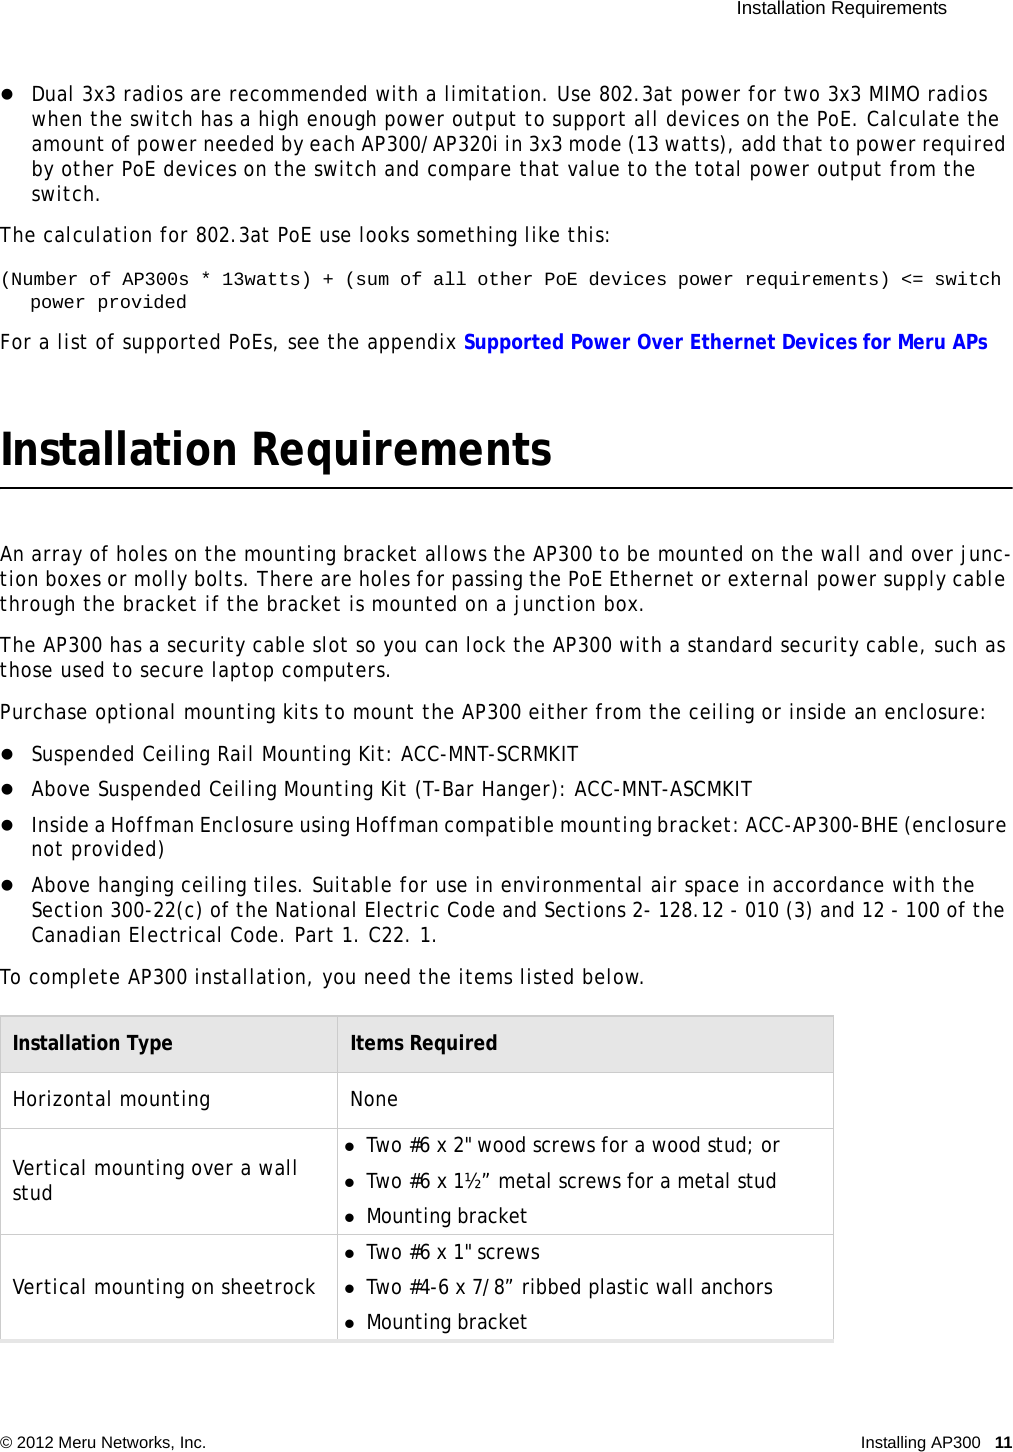  Installation Requirements © 2012 Meru Networks, Inc. Installing AP300 11 Dual 3x3 radios are recommended with a limitation. Use 802.3at power for two 3x3 MIMO radios when the switch has a high enough power output to support all devices on the PoE. Calculate the amount of power needed by each AP300/AP320i in 3x3 mode (13 watts), add that to power required by other PoE devices on the switch and compare that value to the total power output from the switch. The calculation for 802.3at PoE use looks something like this:(Number of AP300s * 13watts) + (sum of all other PoE devices power requirements) &lt;= switch power providedFor a list of supported PoEs, see the appendix Supported Power Over Ethernet Devices for Meru APsInstallation RequirementsAn array of holes on the mounting bracket allows the AP300 to be mounted on the wall and over junc-tion boxes or molly bolts. There are holes for passing the PoE Ethernet or external power supply cable through the bracket if the bracket is mounted on a junction box.The AP300 has a security cable slot so you can lock the AP300 with a standard security cable, such as those used to secure laptop computers.Purchase optional mounting kits to mount the AP300 either from the ceiling or inside an enclosure: Suspended Ceiling Rail Mounting Kit: ACC-MNT-SCRMKITAbove Suspended Ceiling Mounting Kit (T-Bar Hanger): ACC-MNT-ASCMKITInside a Hoffman Enclosure using Hoffman compatible mounting bracket: ACC-AP300-BHE (enclosure not provided)Above hanging ceiling tiles. Suitable for use in environmental air space in accordance with the Section 300-22(c) of the National Electric Code and Sections 2- 128.12 - 010 (3) and 12 - 100 of the Canadian Electrical Code. Part 1. C22. 1. To complete AP300 installation, you need the items listed below.Installation Type Items RequiredHorizontal mounting NoneVertical mounting over a wall studTwo #6 x 2&quot; wood screws for a wood stud; or Two #6 x 1½” metal screws for a metal studMounting bracketVertical mounting on sheetrockTwo #6 x 1&quot; screwsTwo #4-6 x 7/8” ribbed plastic wall anchorsMounting bracket